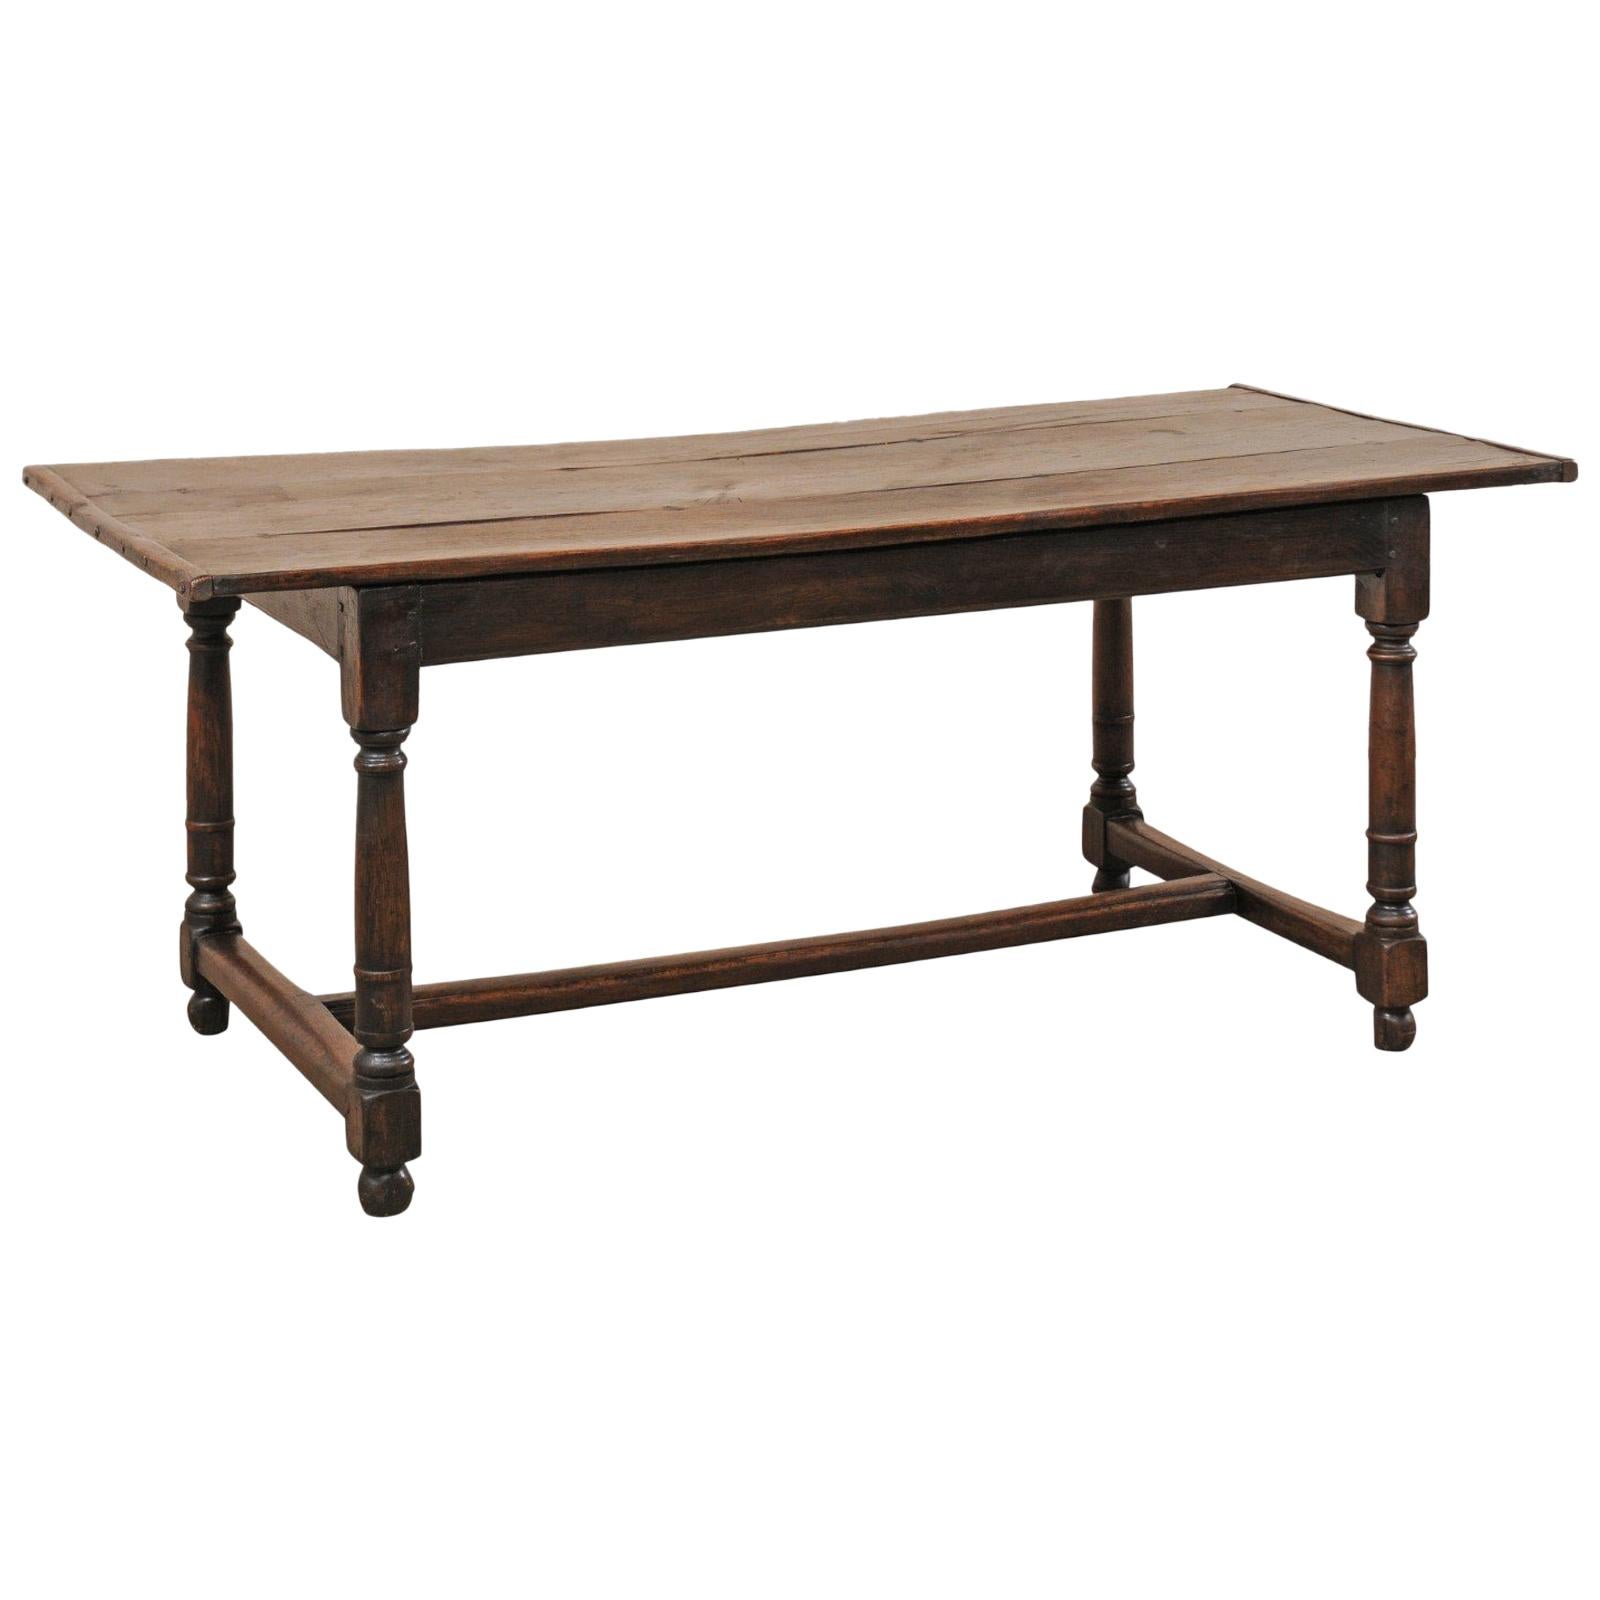 Early 19th Century Walnut Dining Table or Desk from Italy